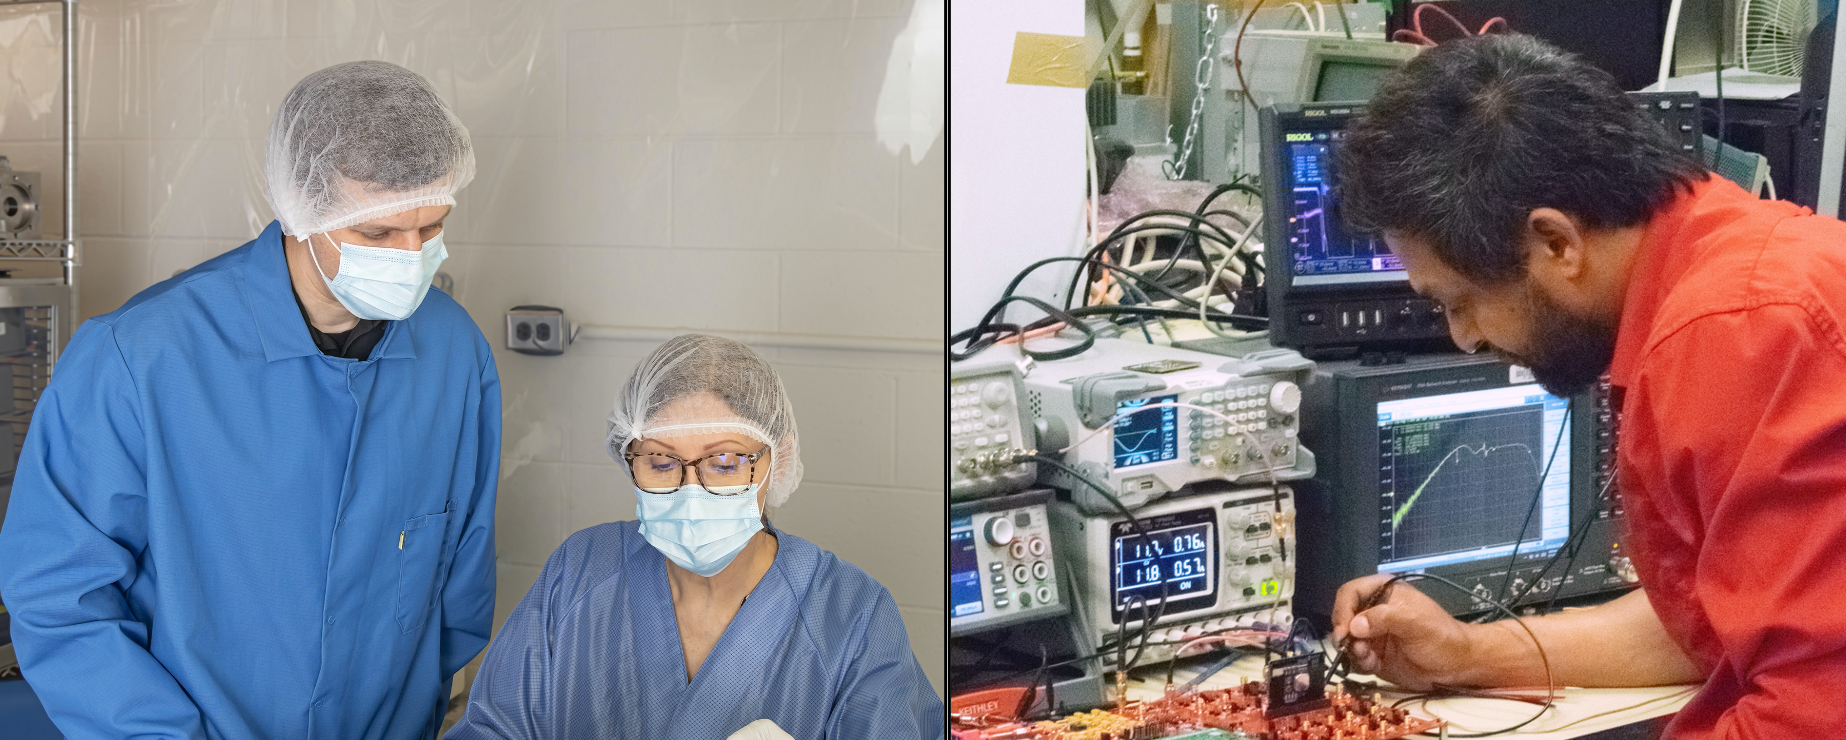 Two photos side by side. Left photo: a man and a woman wearing blue lab coats and hair nets work on a sensor in a small metal box. Right side: a man in a red shirt sits at a table working on a sensor amplifier